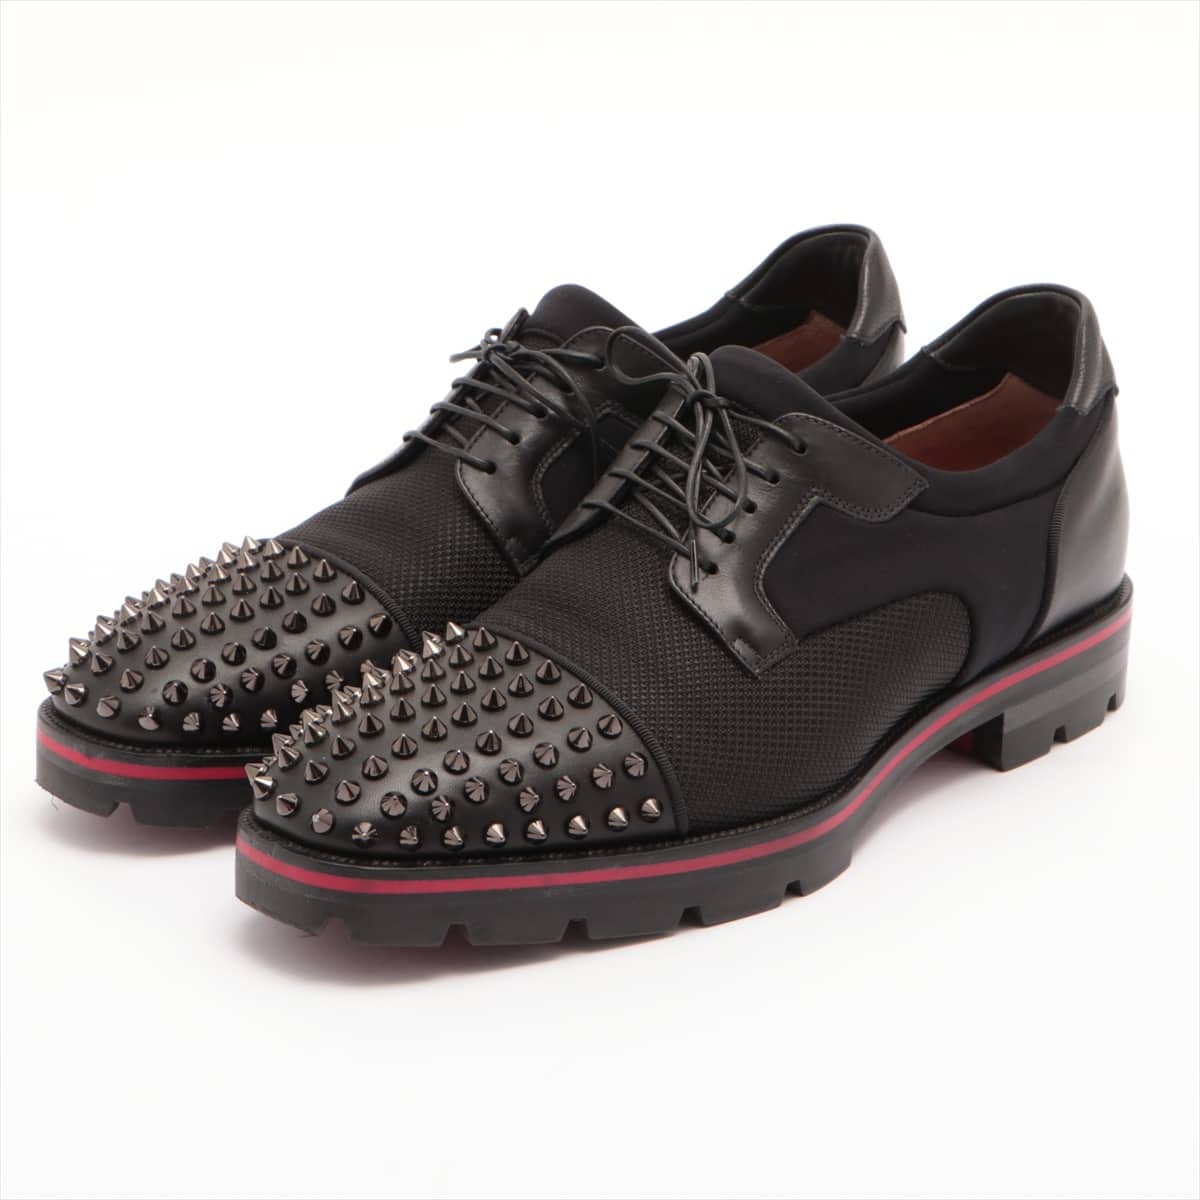 Christian Louboutin Lewis Spike Nylon & Leather Leather shoes 42 Men's Black Derby shoes